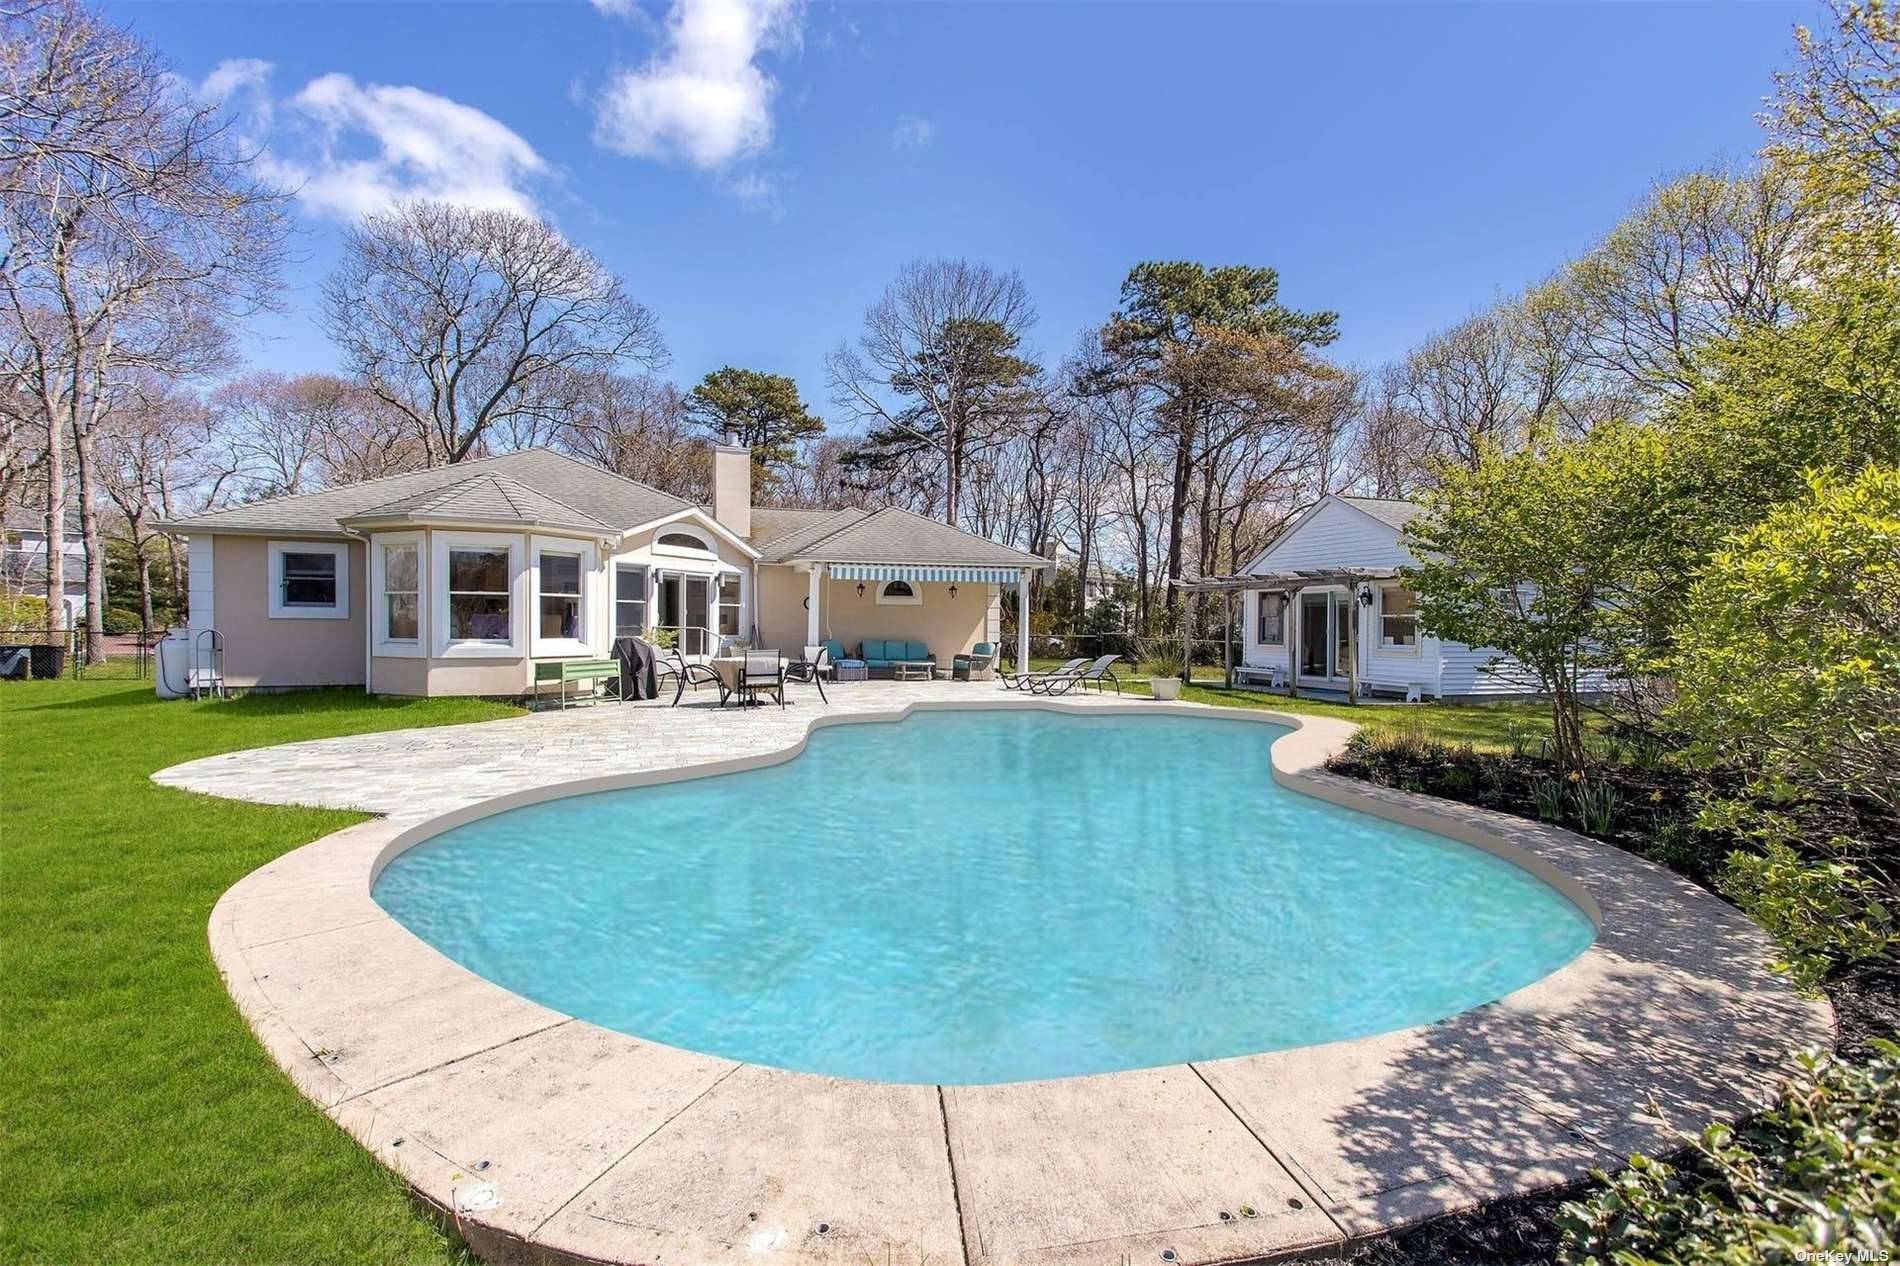 This perfect getaway in Hampton Bays epitomizes Summer in the Hamptons with its close proximity to all the gorgeous bay beaches, restaurants, and shops.